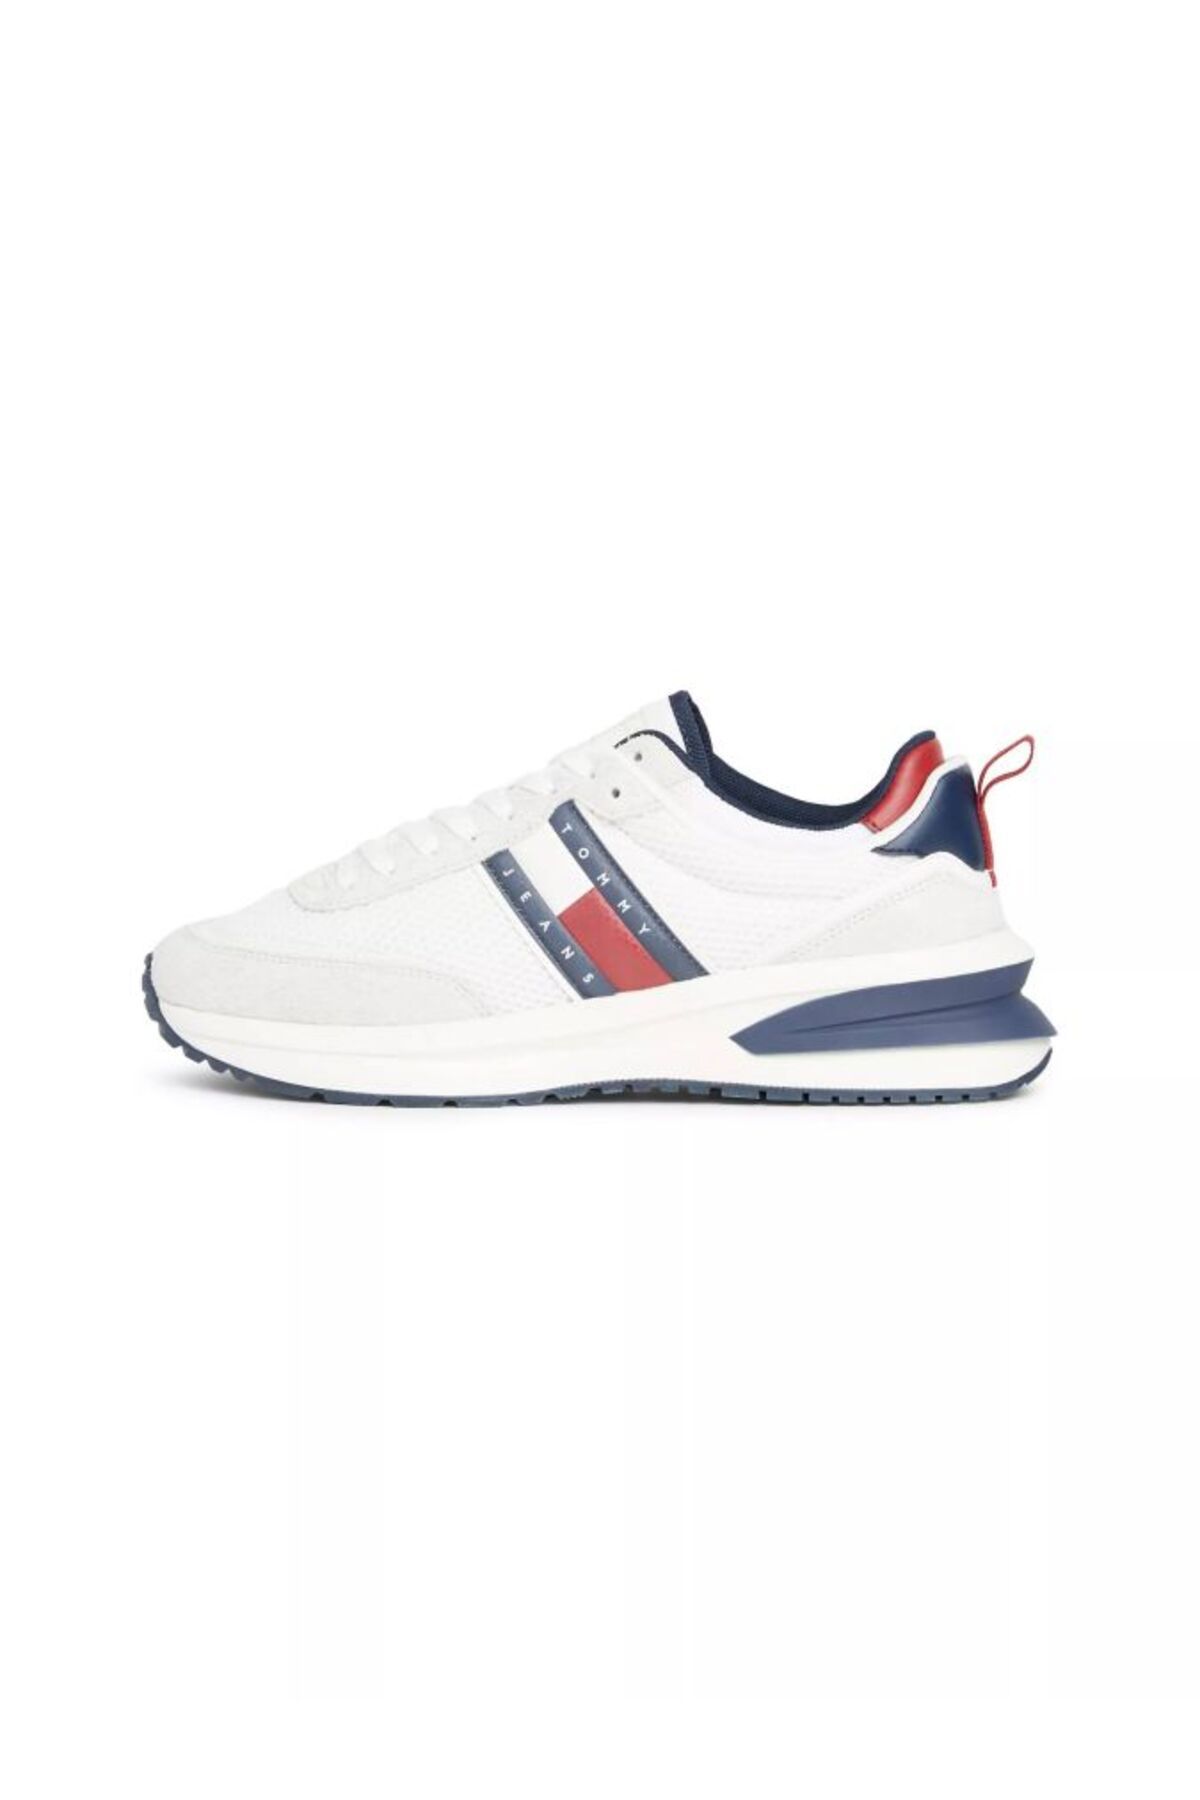 Tommy Hilfiger TJM RUNNER LEATHER OUTSOLE